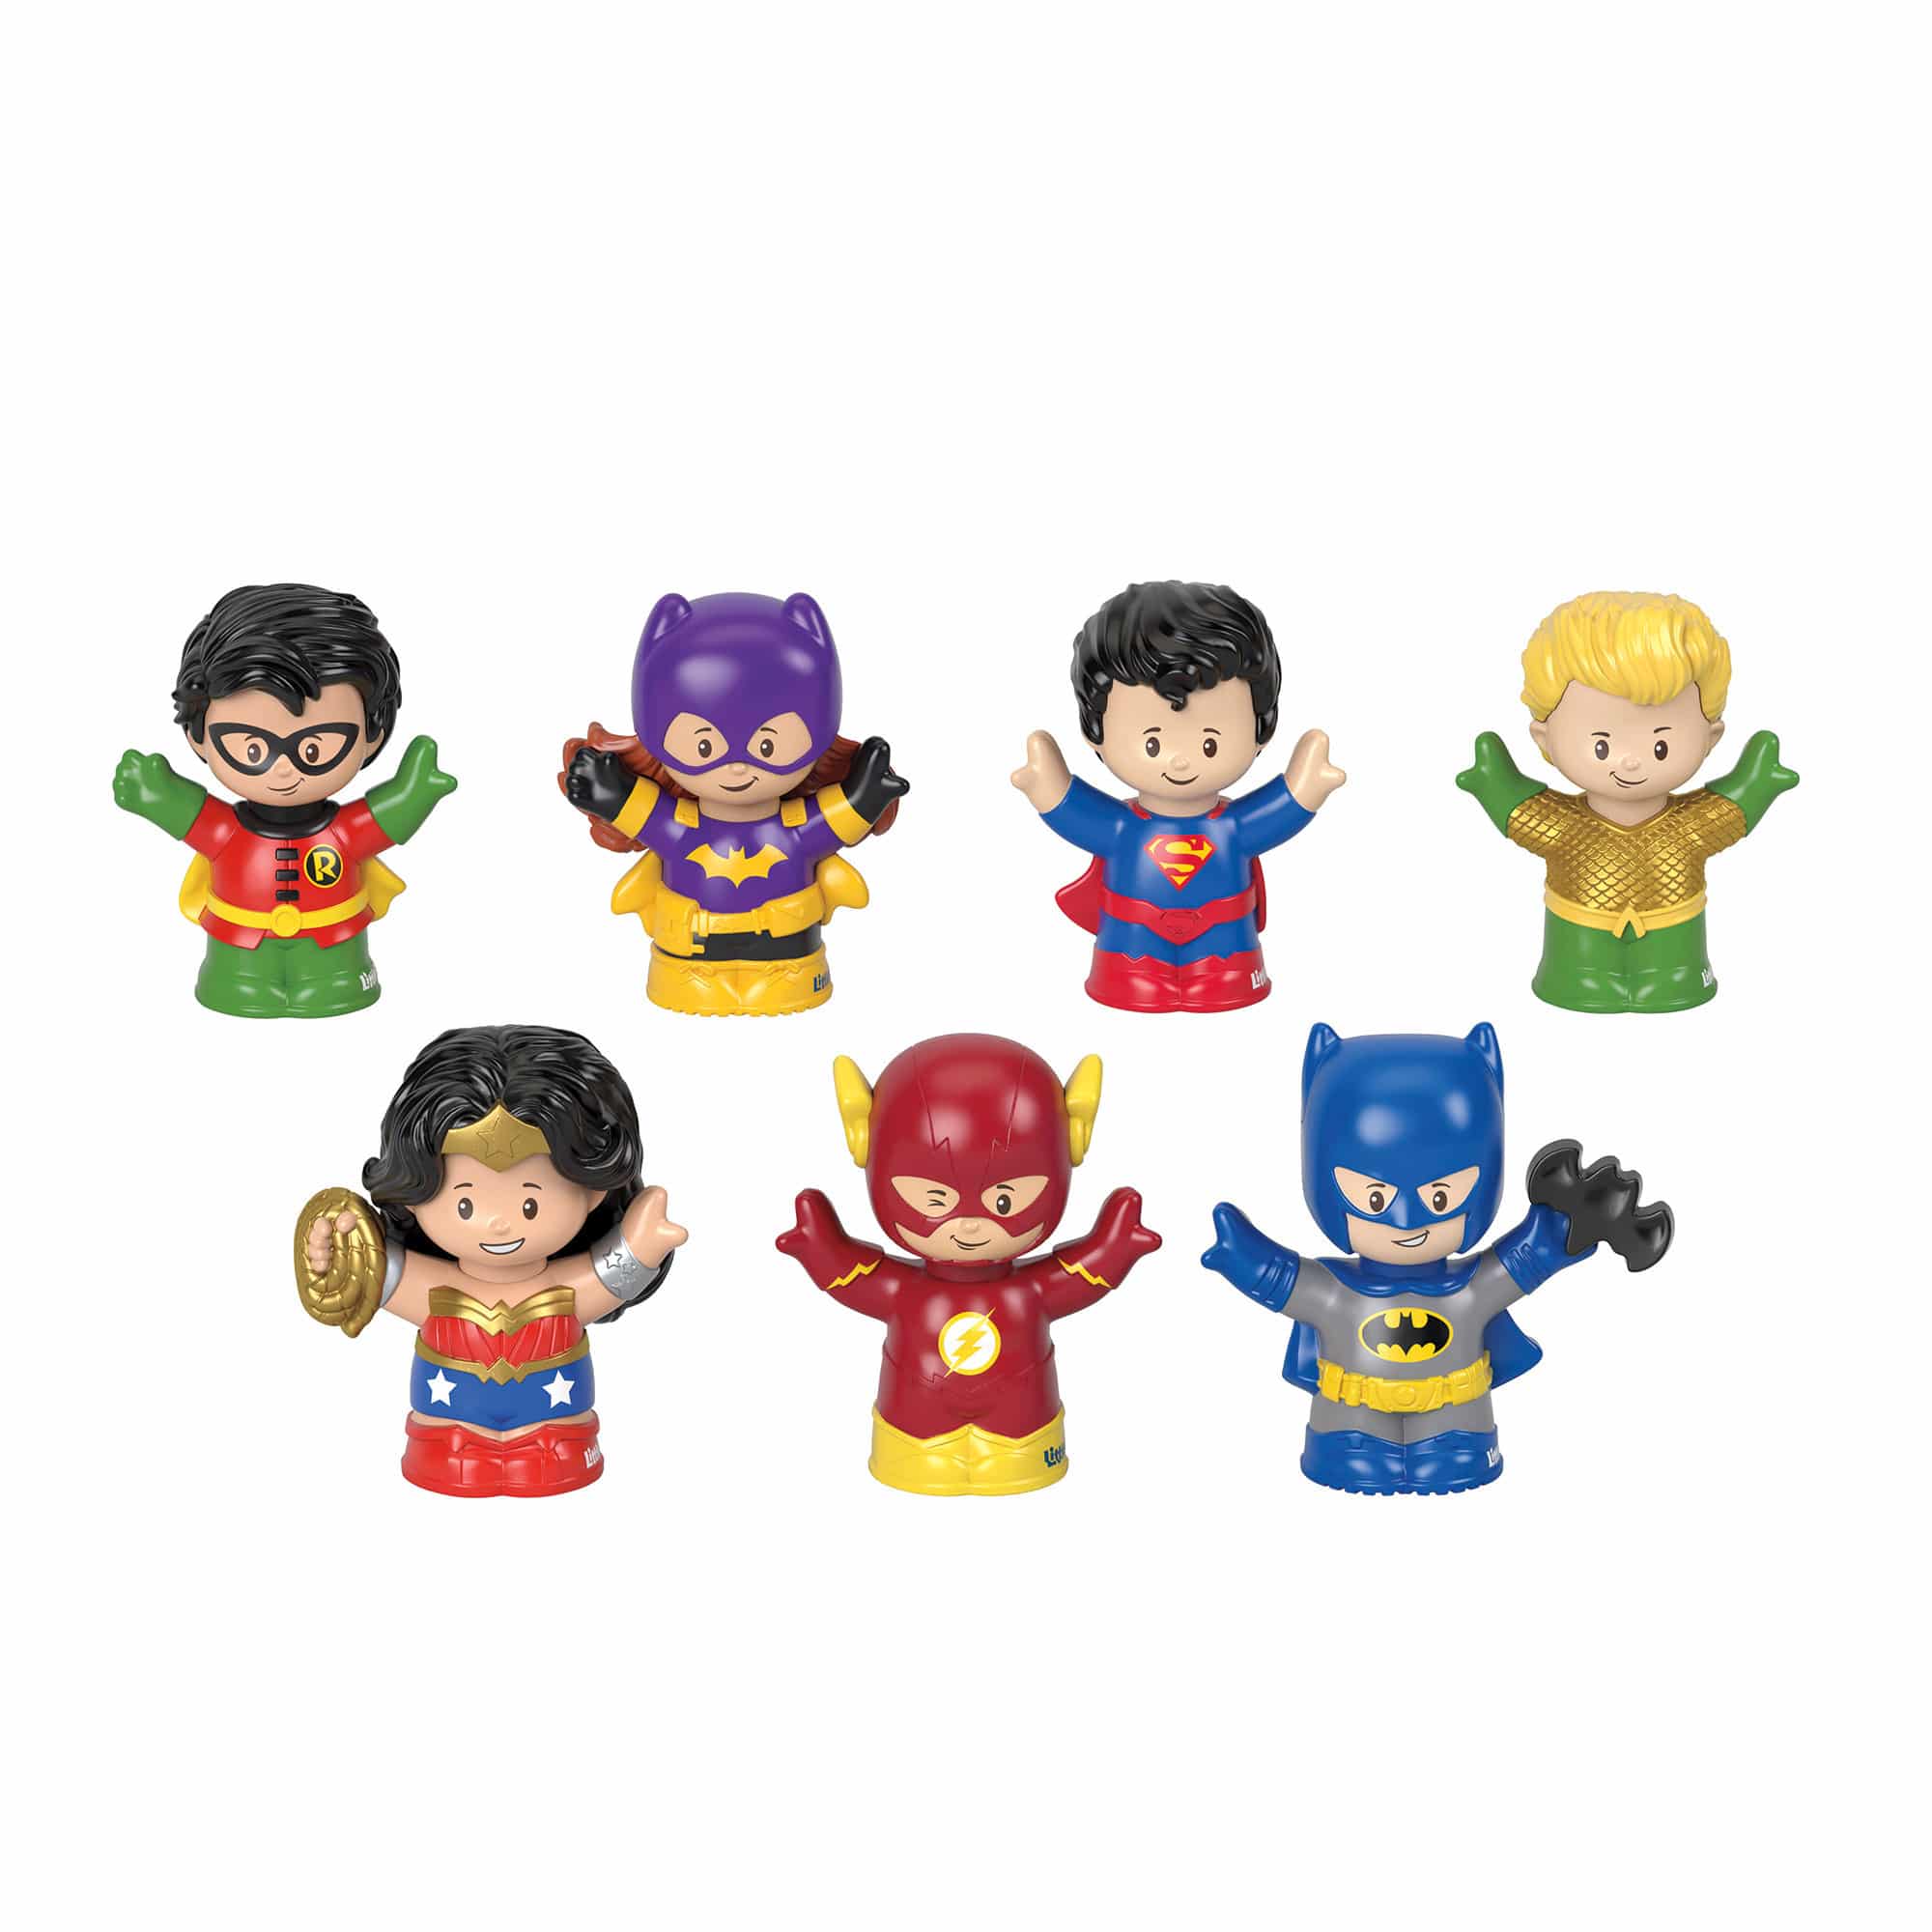 Fisher Price - Little People - DC Super Friends